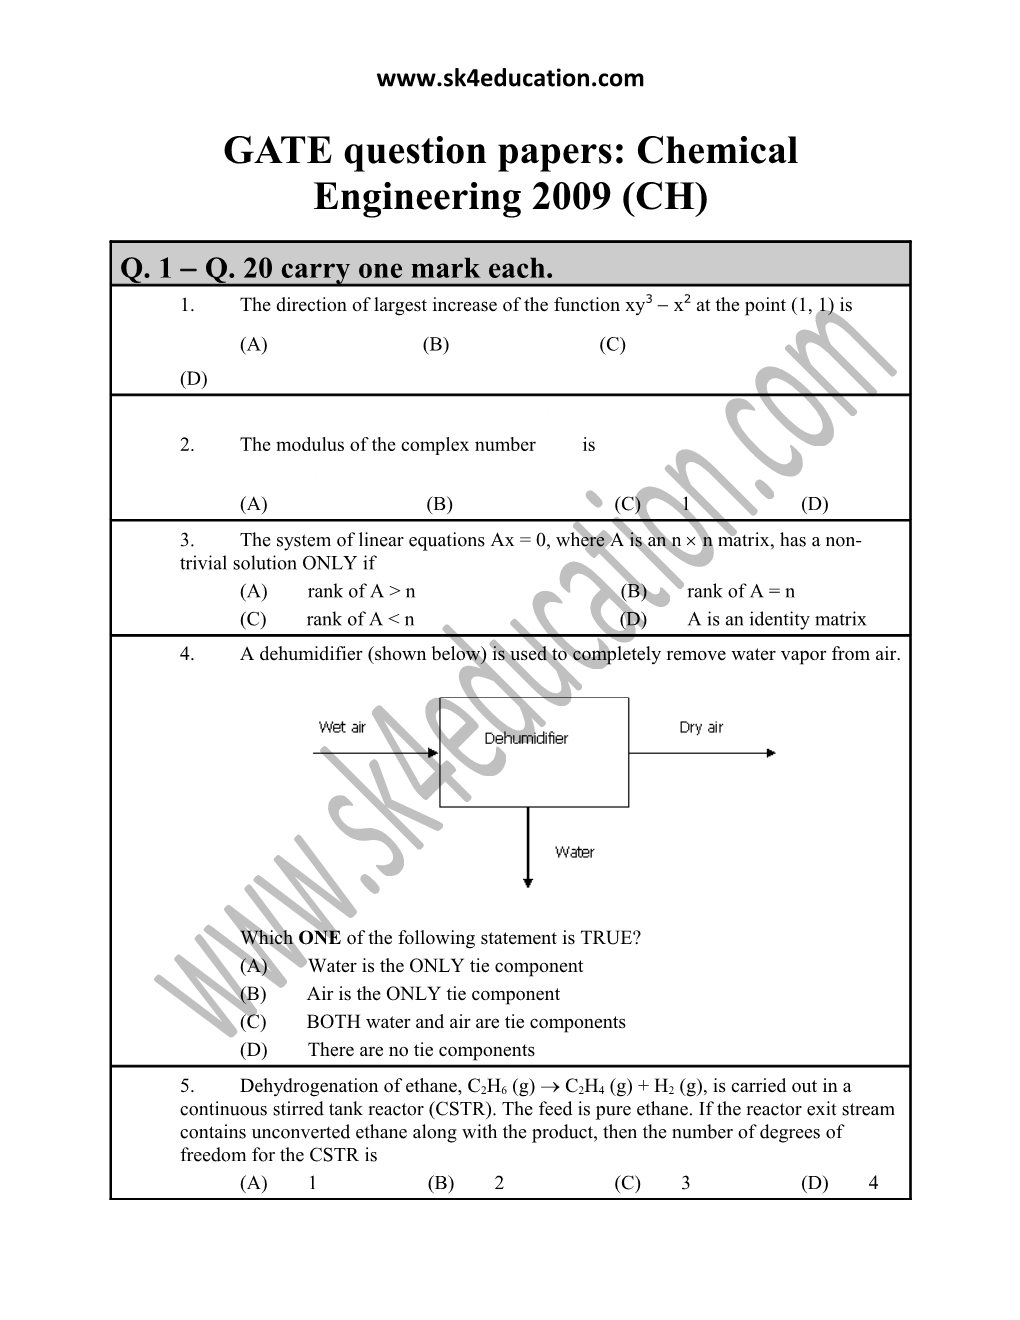 GATE Question Papers: Chemical Engineering 2009 (CH)